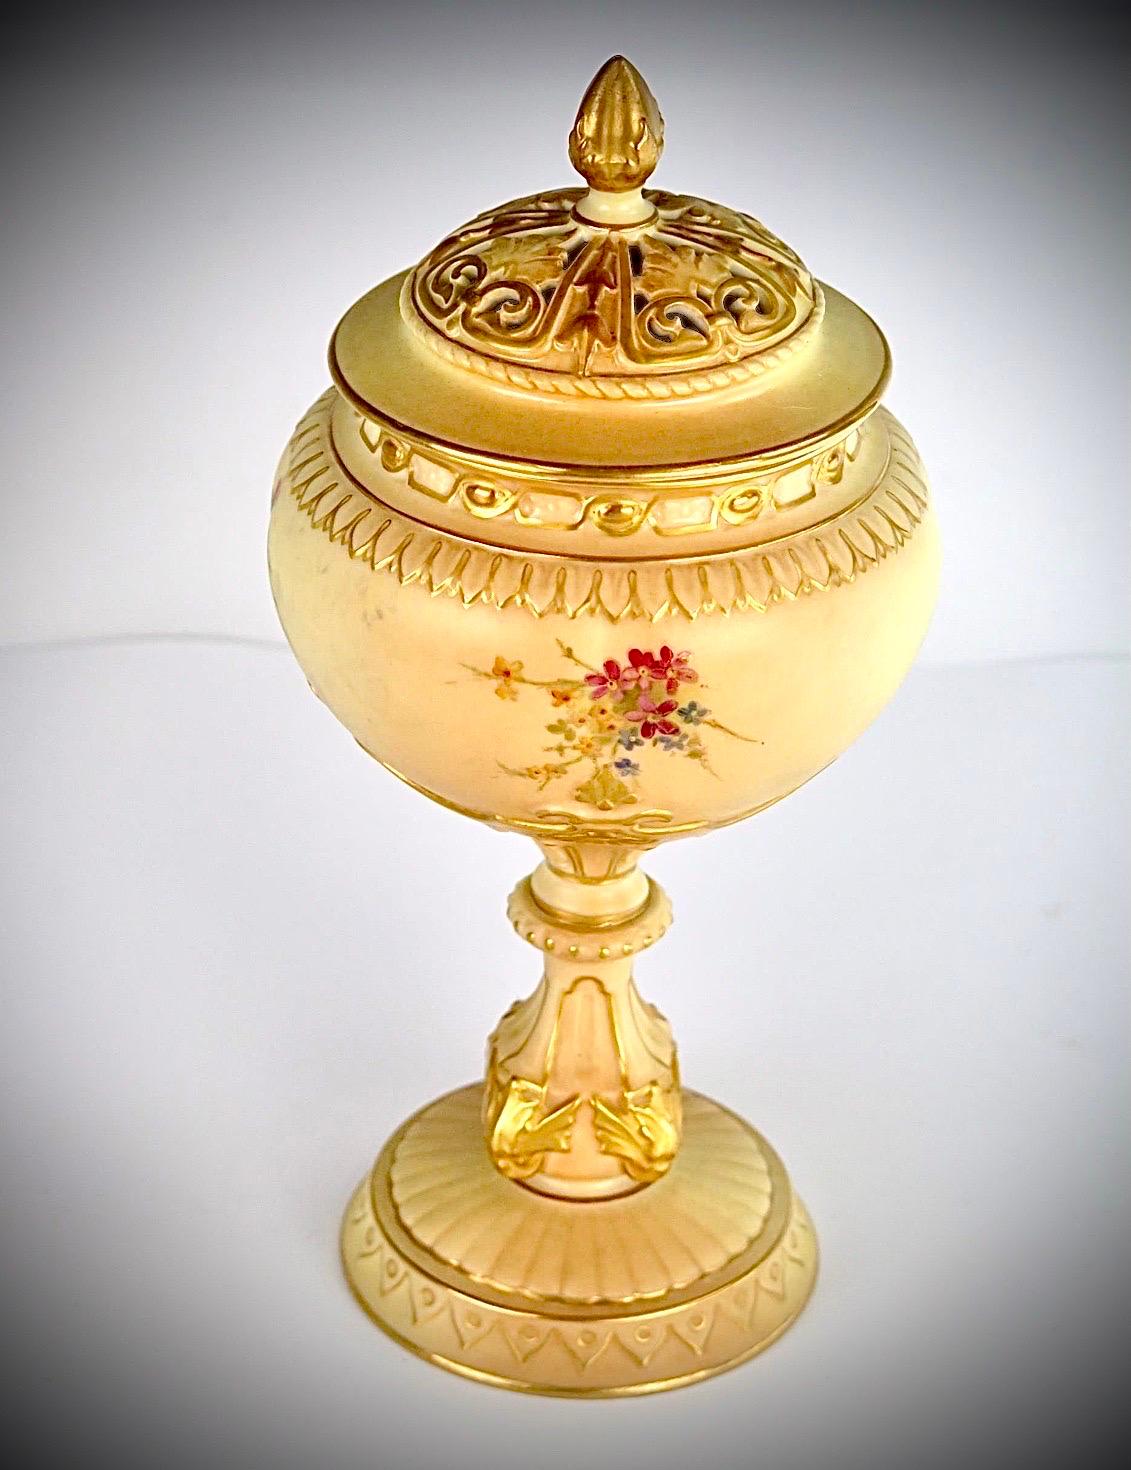 Beautiful antique Royal Worcester blush ivory
Pot Pourri Pedestal vase complete with gilted
Pierced cover painted with flowers and foliage.
Dated 1911
9.5ins high.